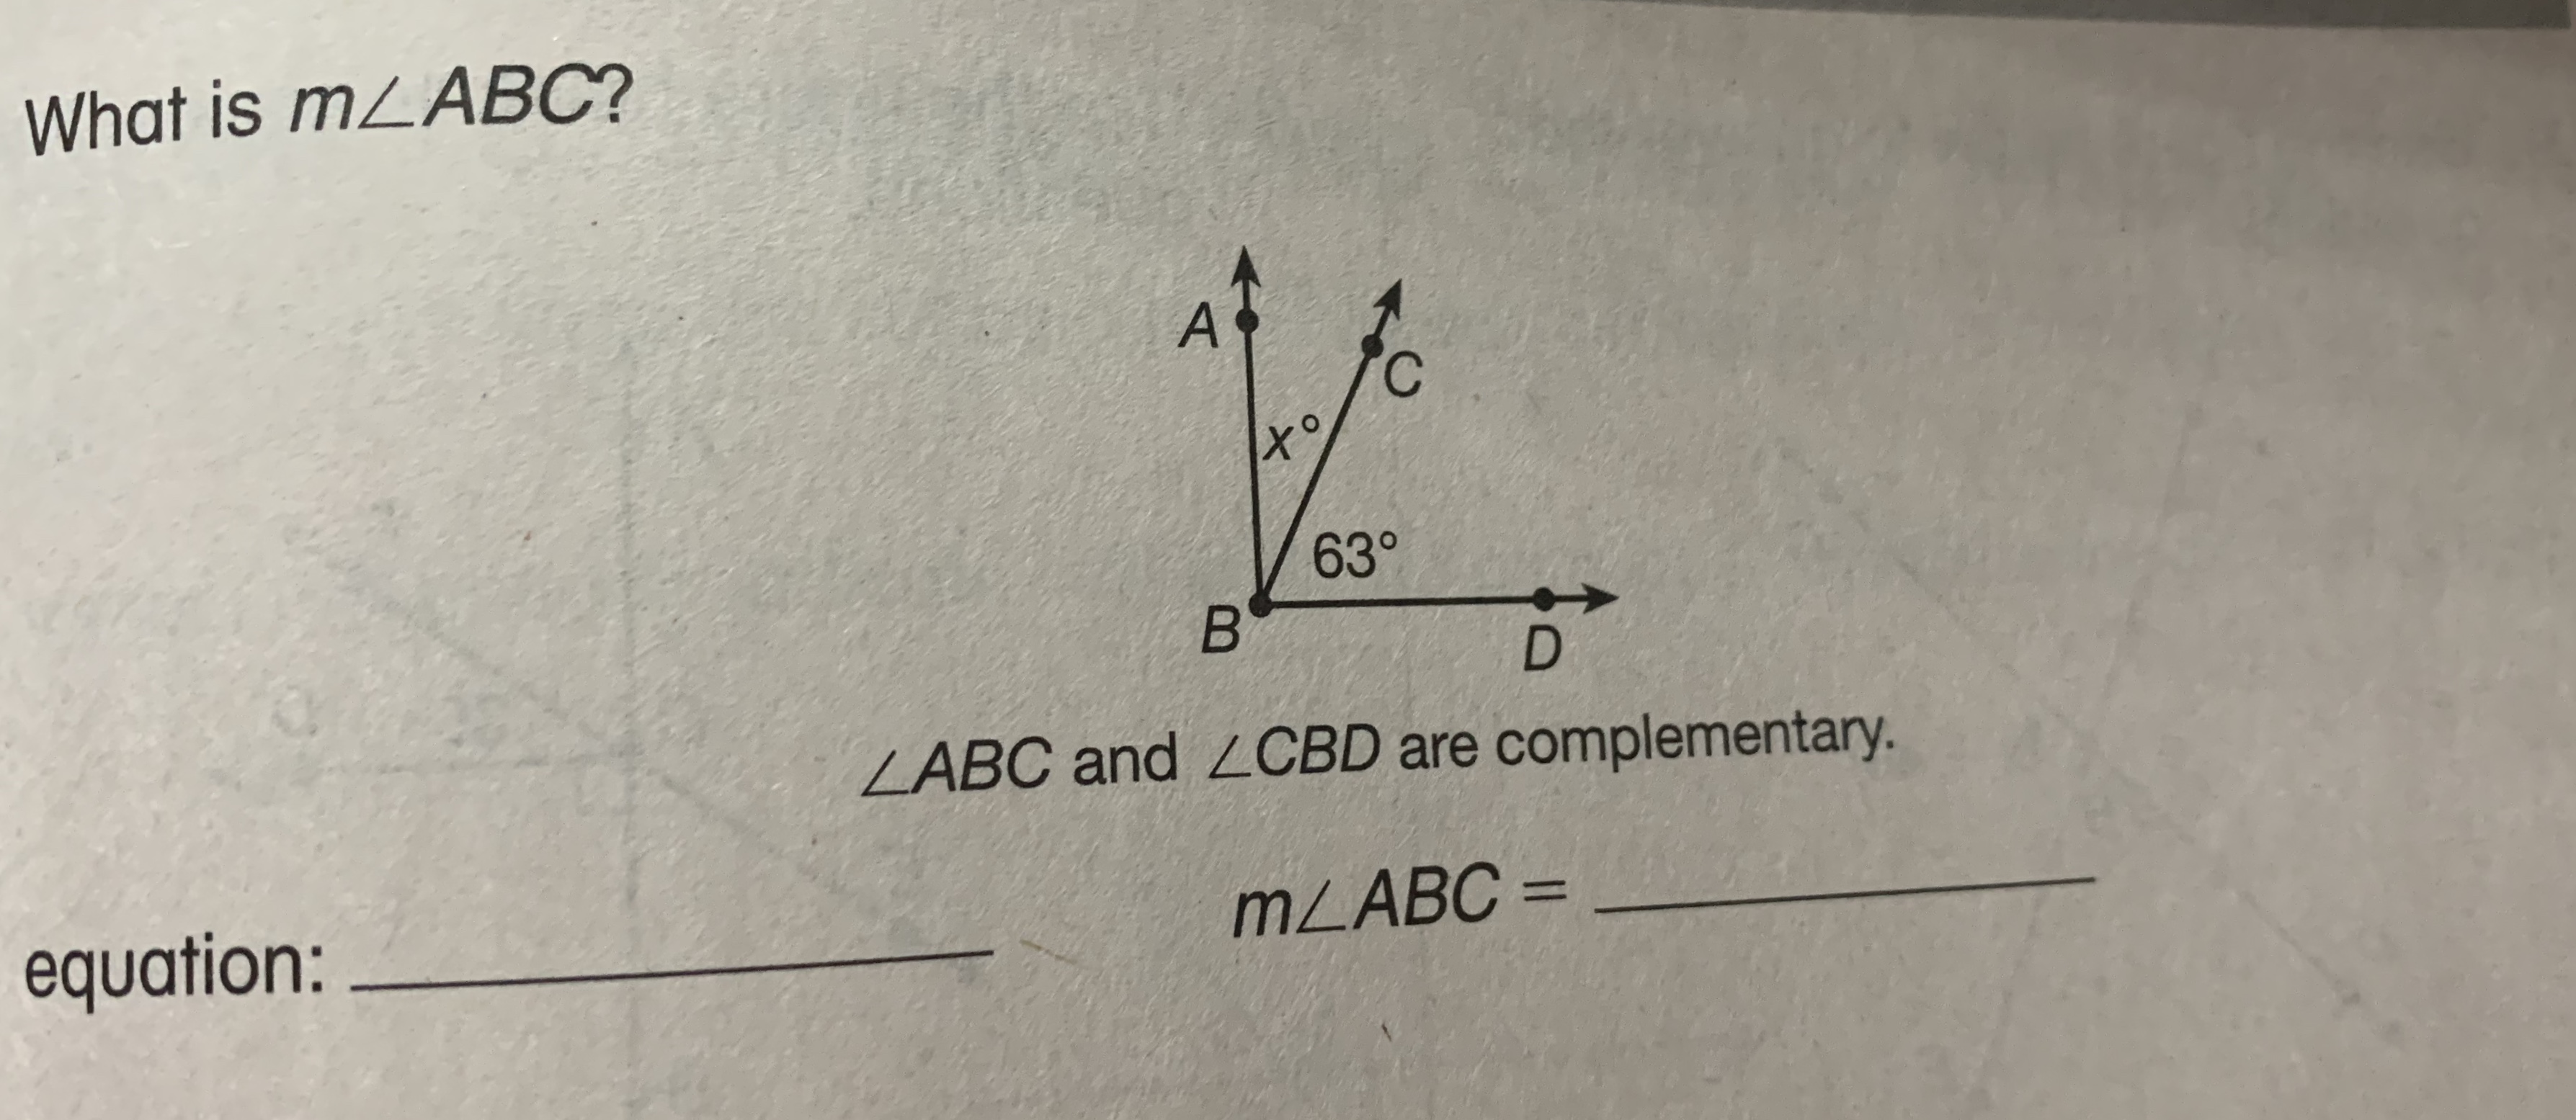 What is mZABC?
63°
LABC and LCBD are compllementary.
MZABC =
equation:
%3D
to
